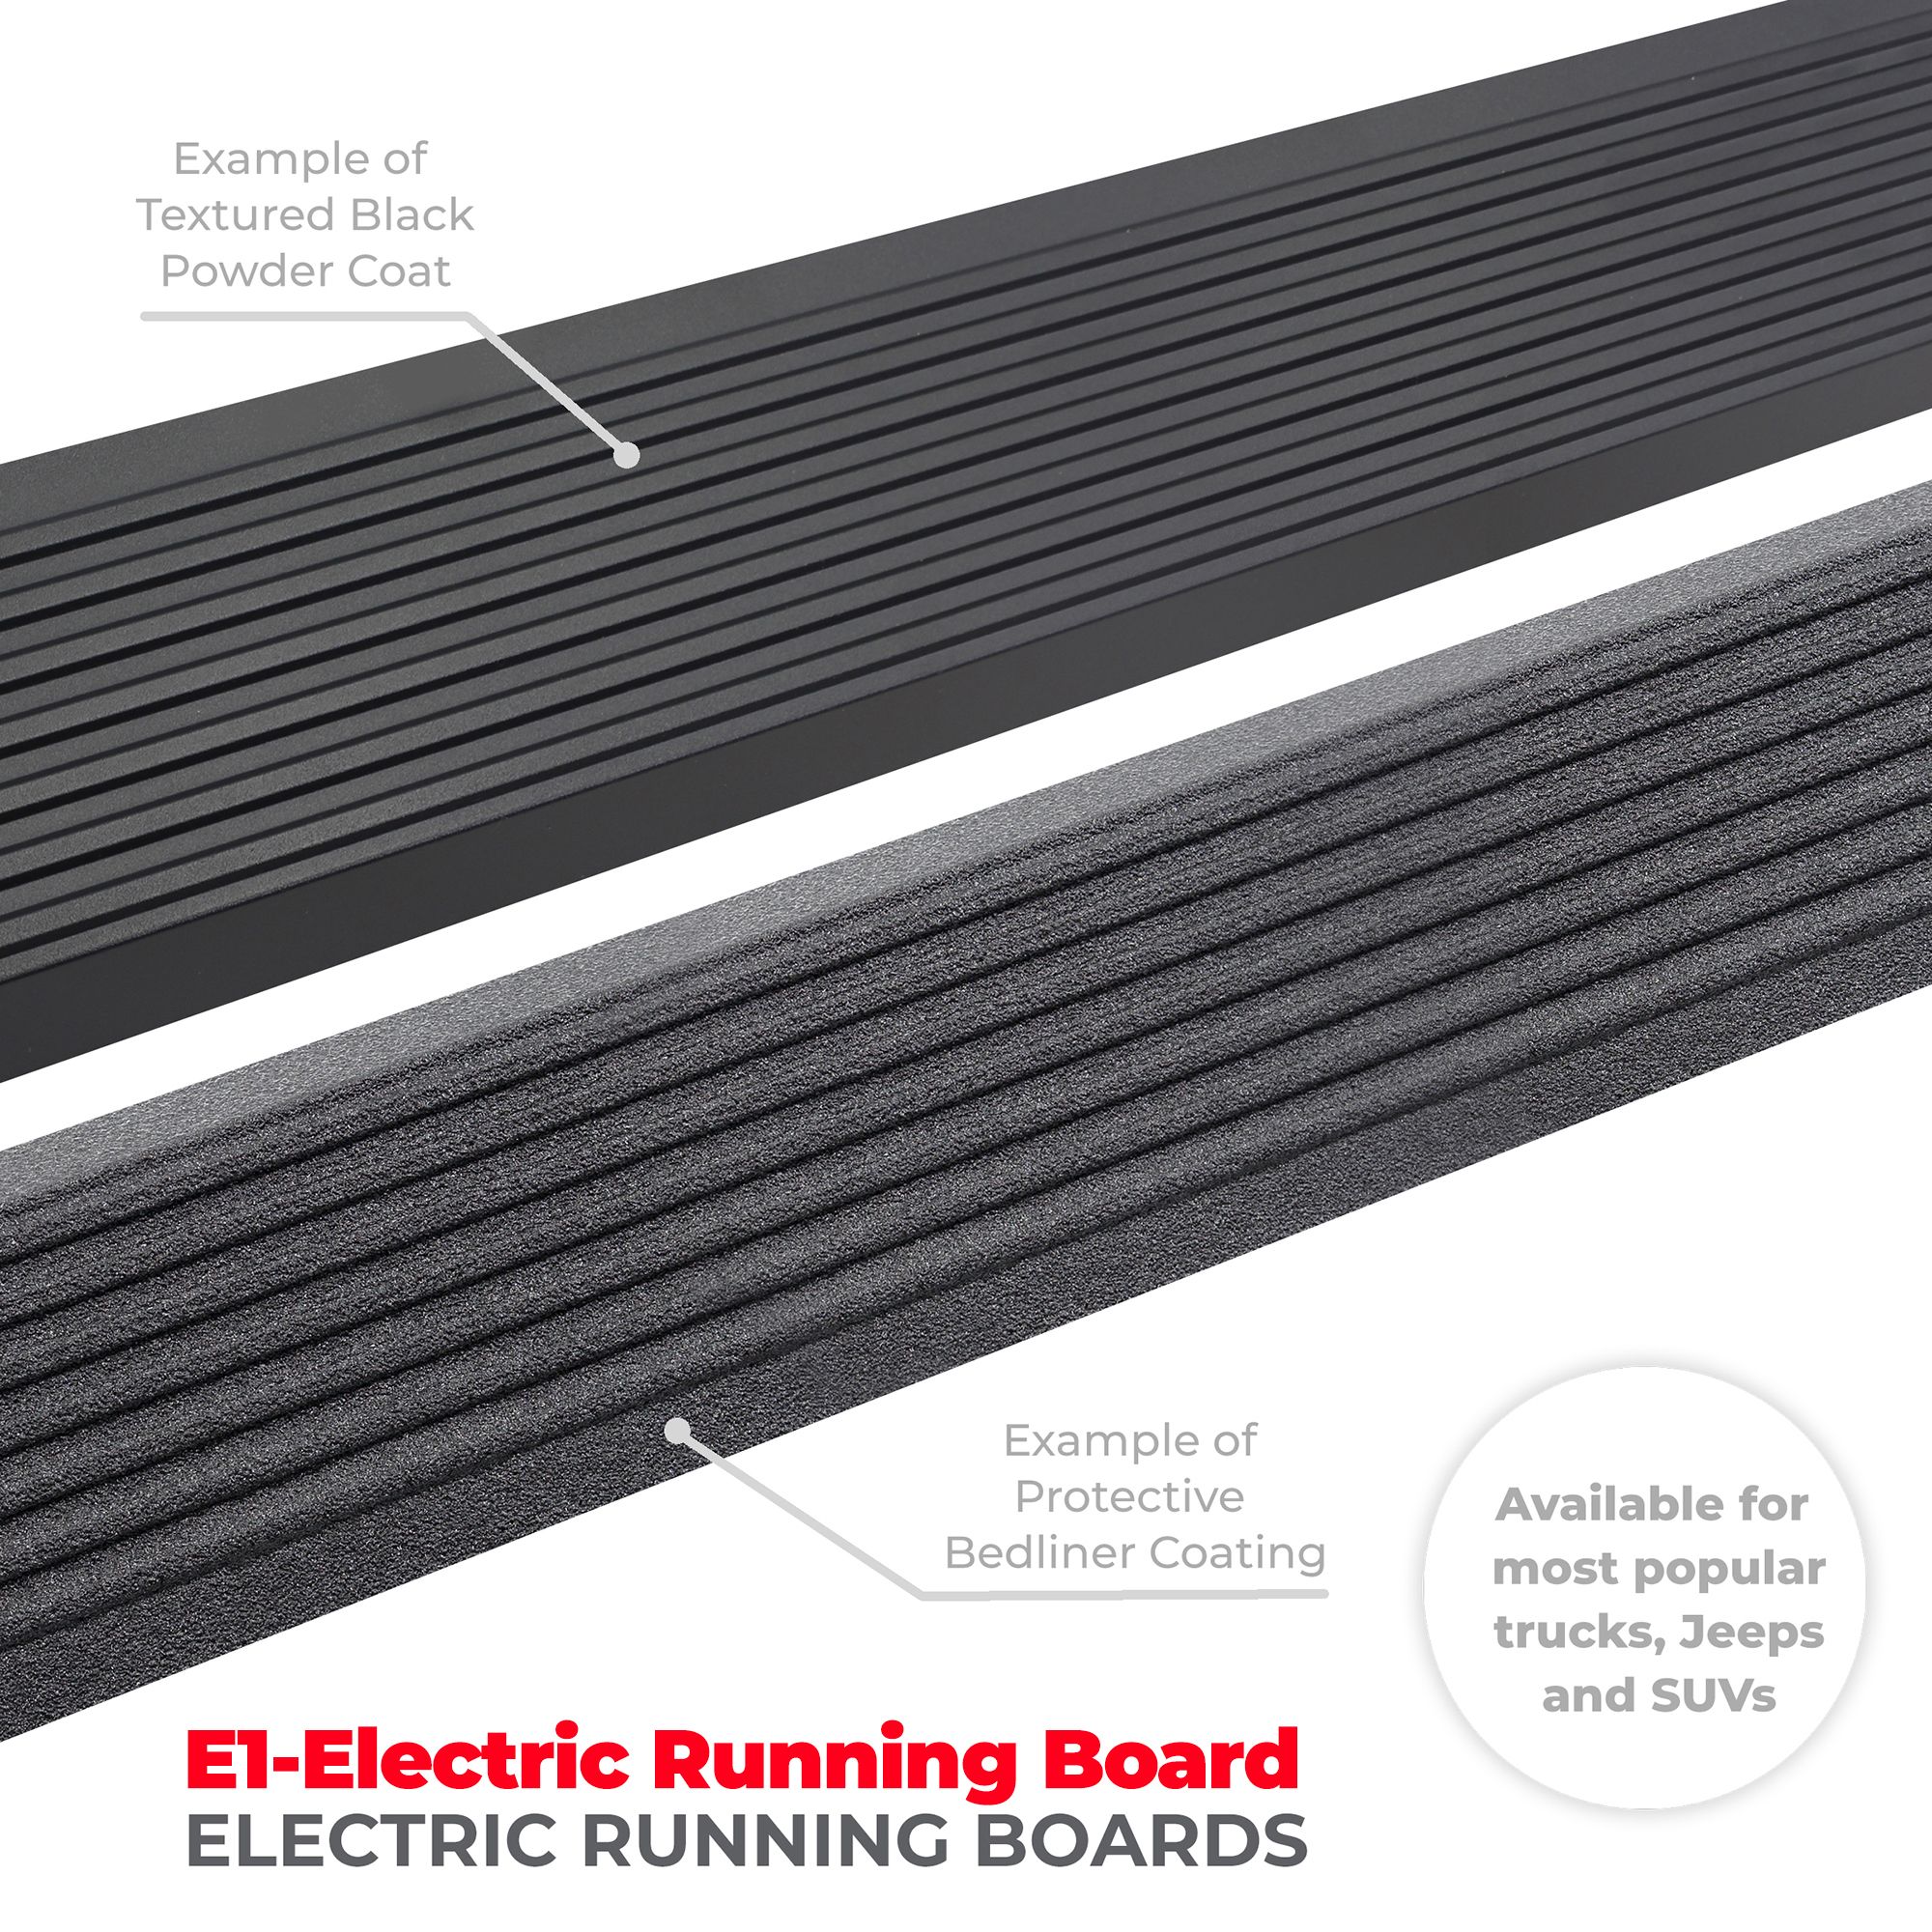 Go Rhino 20306880T - E1 Electric Running Boards With Mounting Brackets - Protective Bedliner Coating